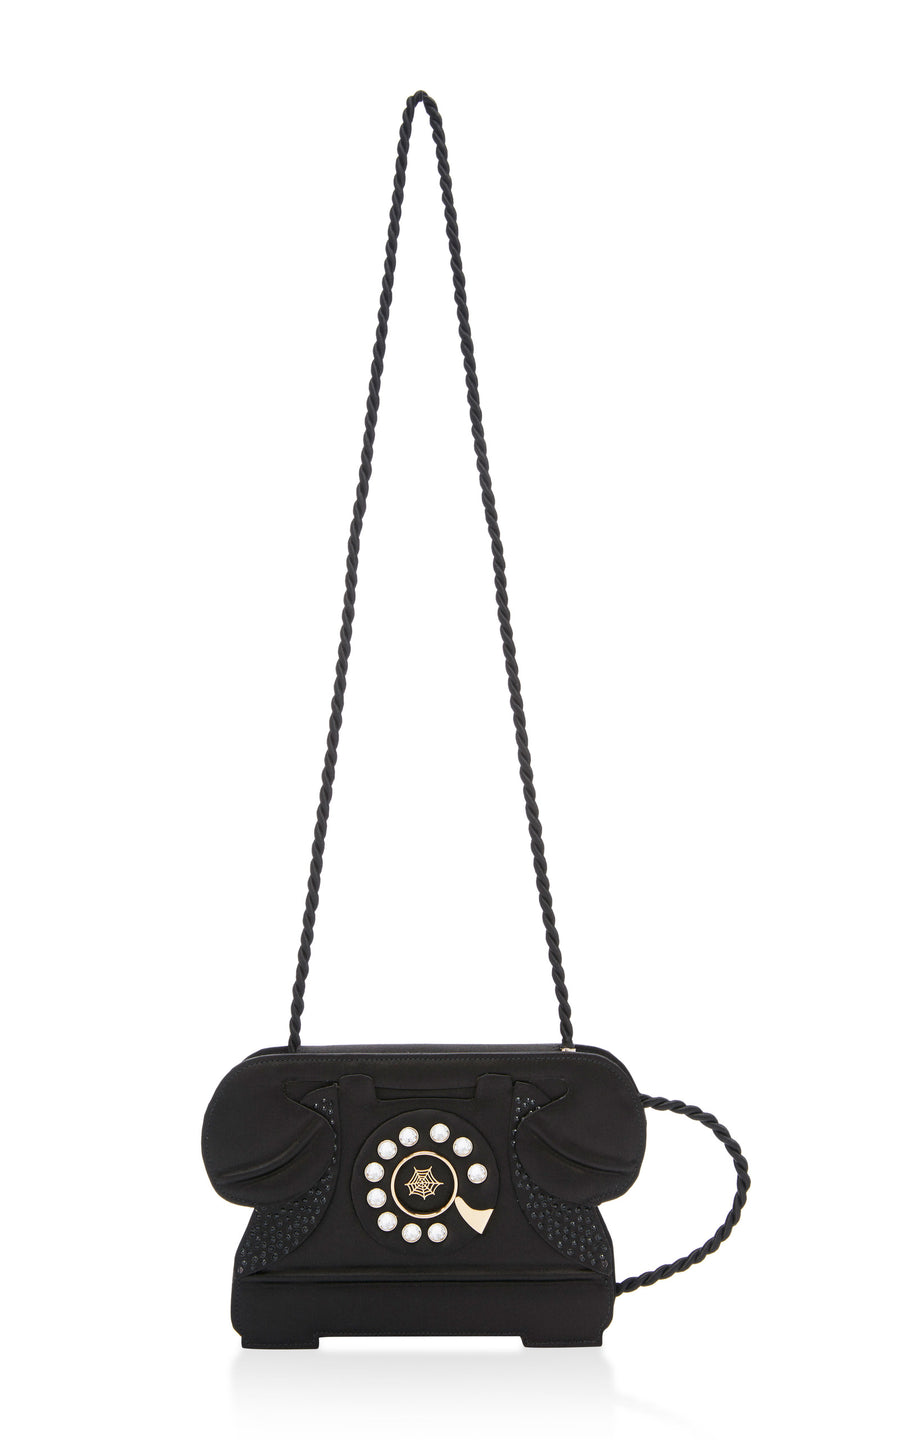 Charlotte Olympia “Dial to Accessorise” satin bag